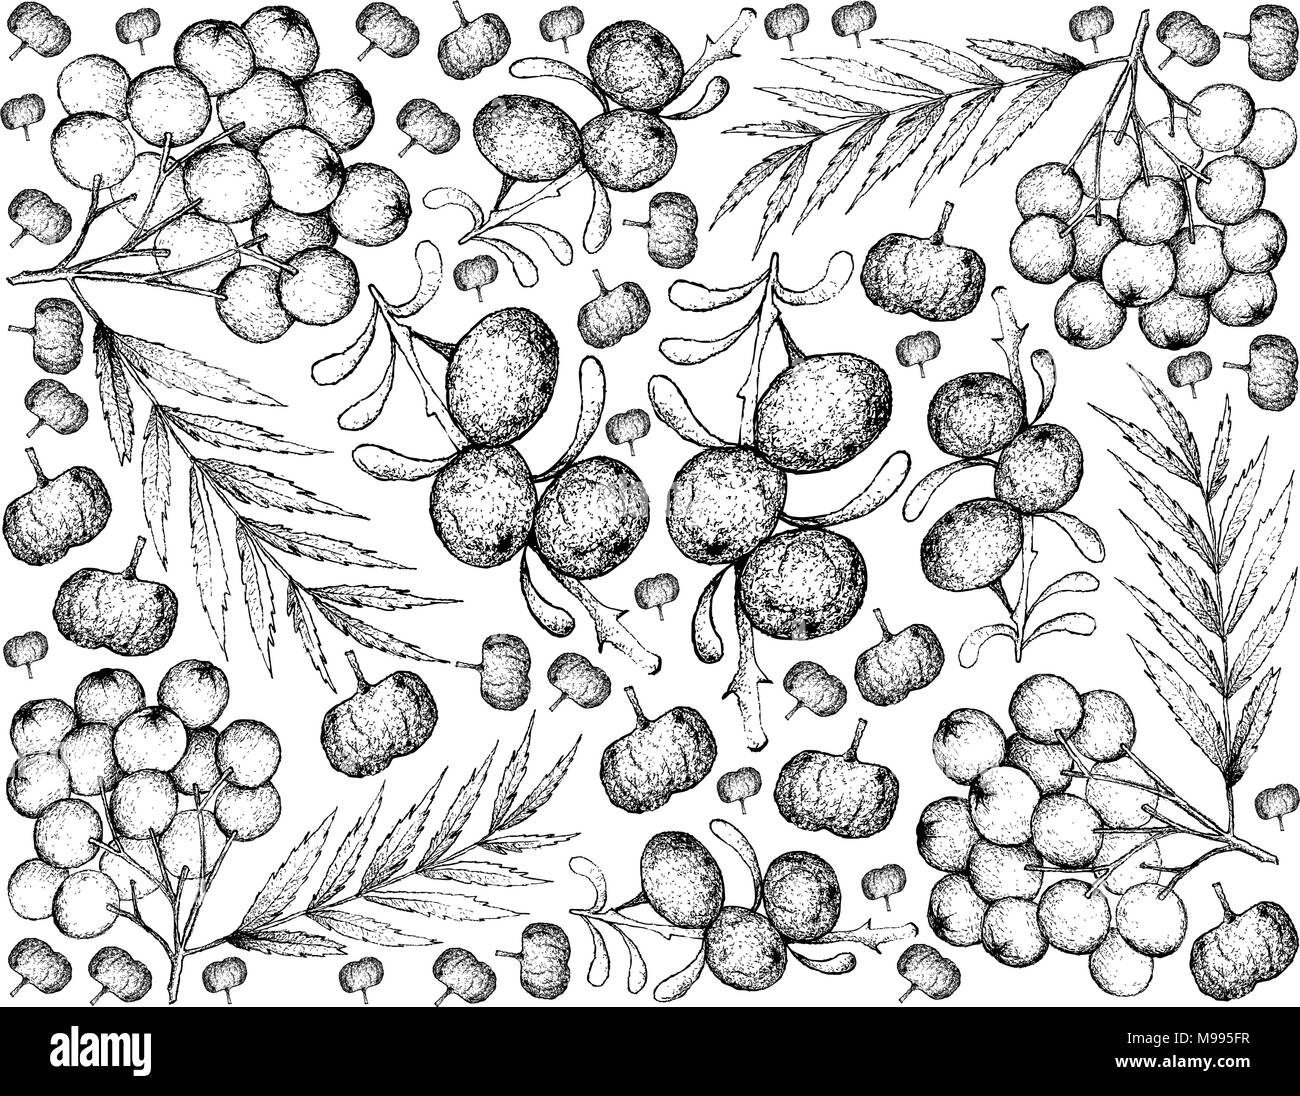 Berry Fruit, Illustration Wallpaper Background of Hand Drawn Sketch of Black Goji or Lycium Ruthenicum Fruits. Stock Vector